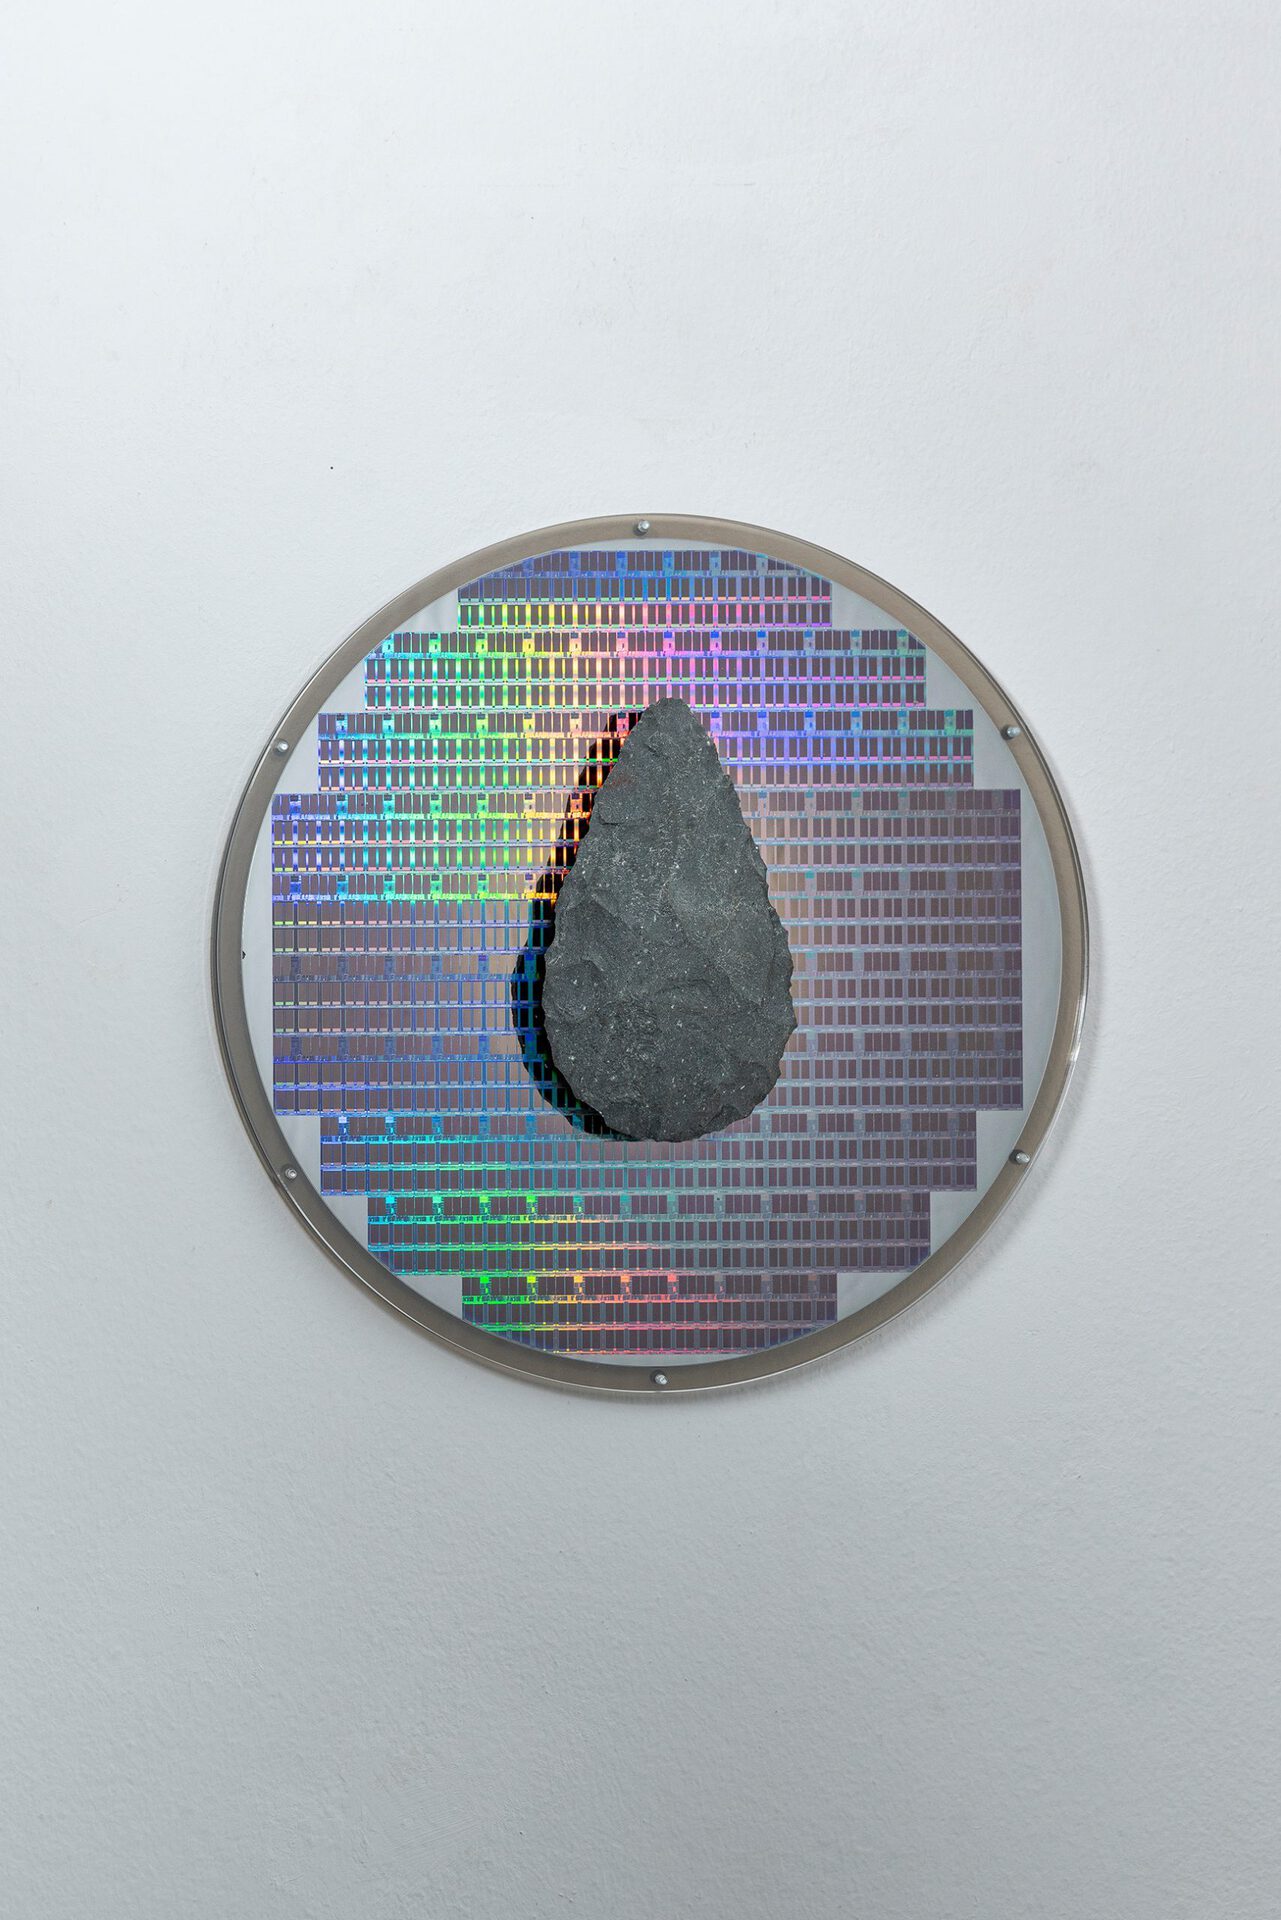 Troika, Evolutionary Composite, 2022, Silicon wafer, flint biface and perspex, 32 x 32 x 5 cm